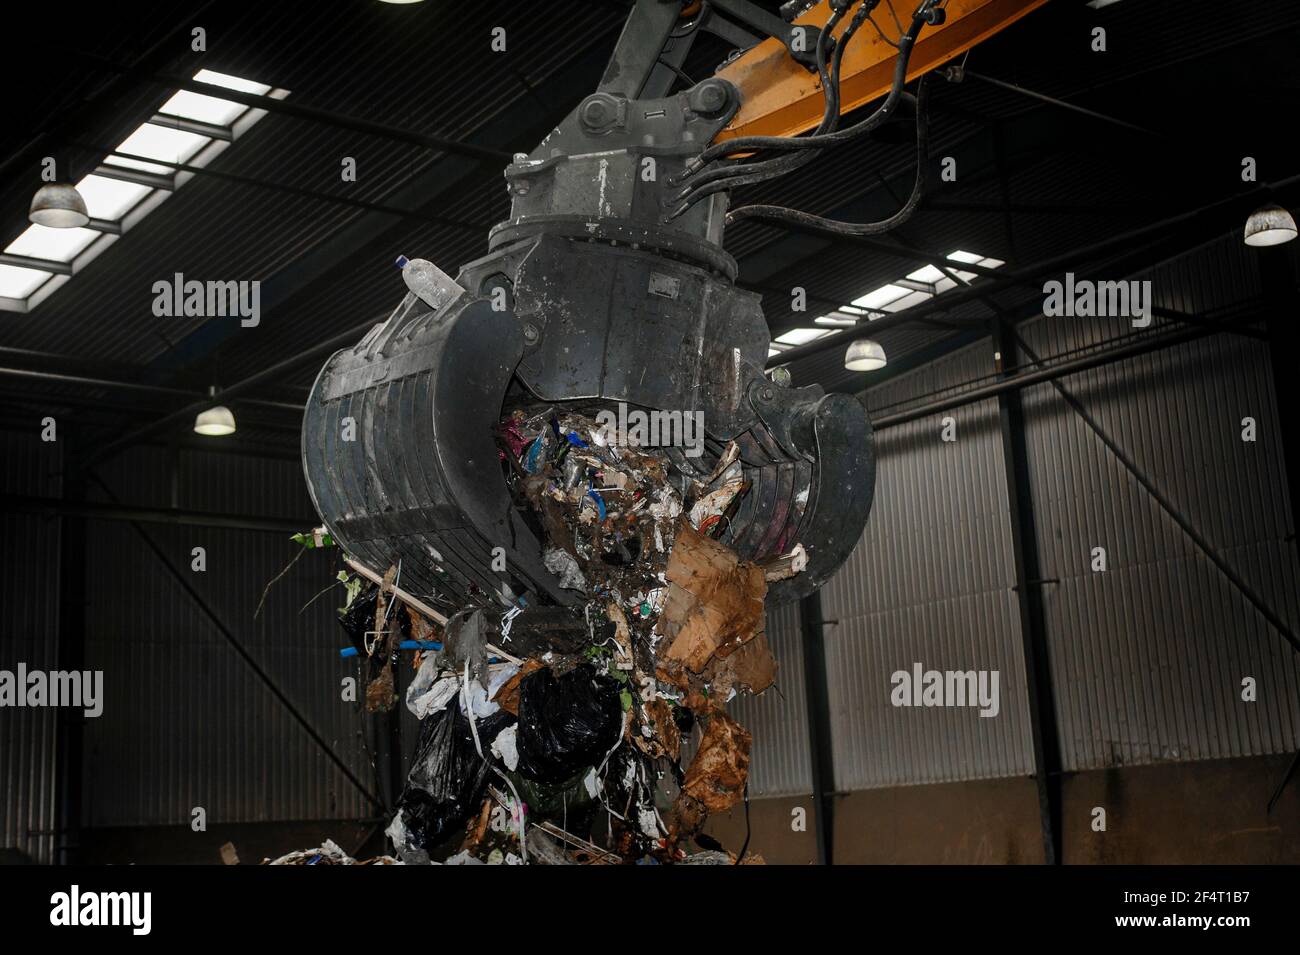 Mechanical grabber at work in a recycling plant in England. Stock Photo